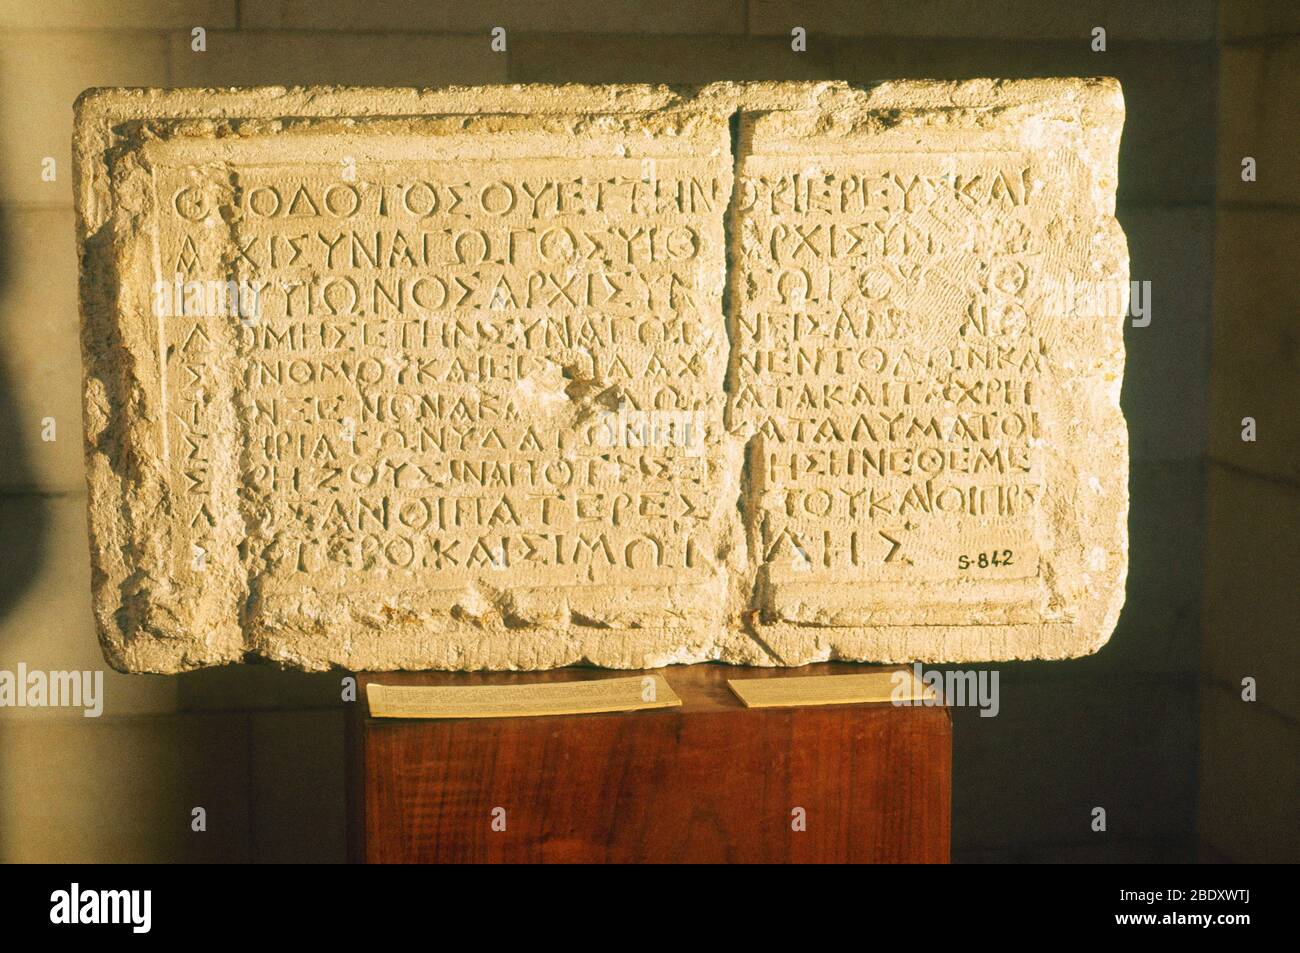 Theodotus Synagogue Stone Banque D'Images